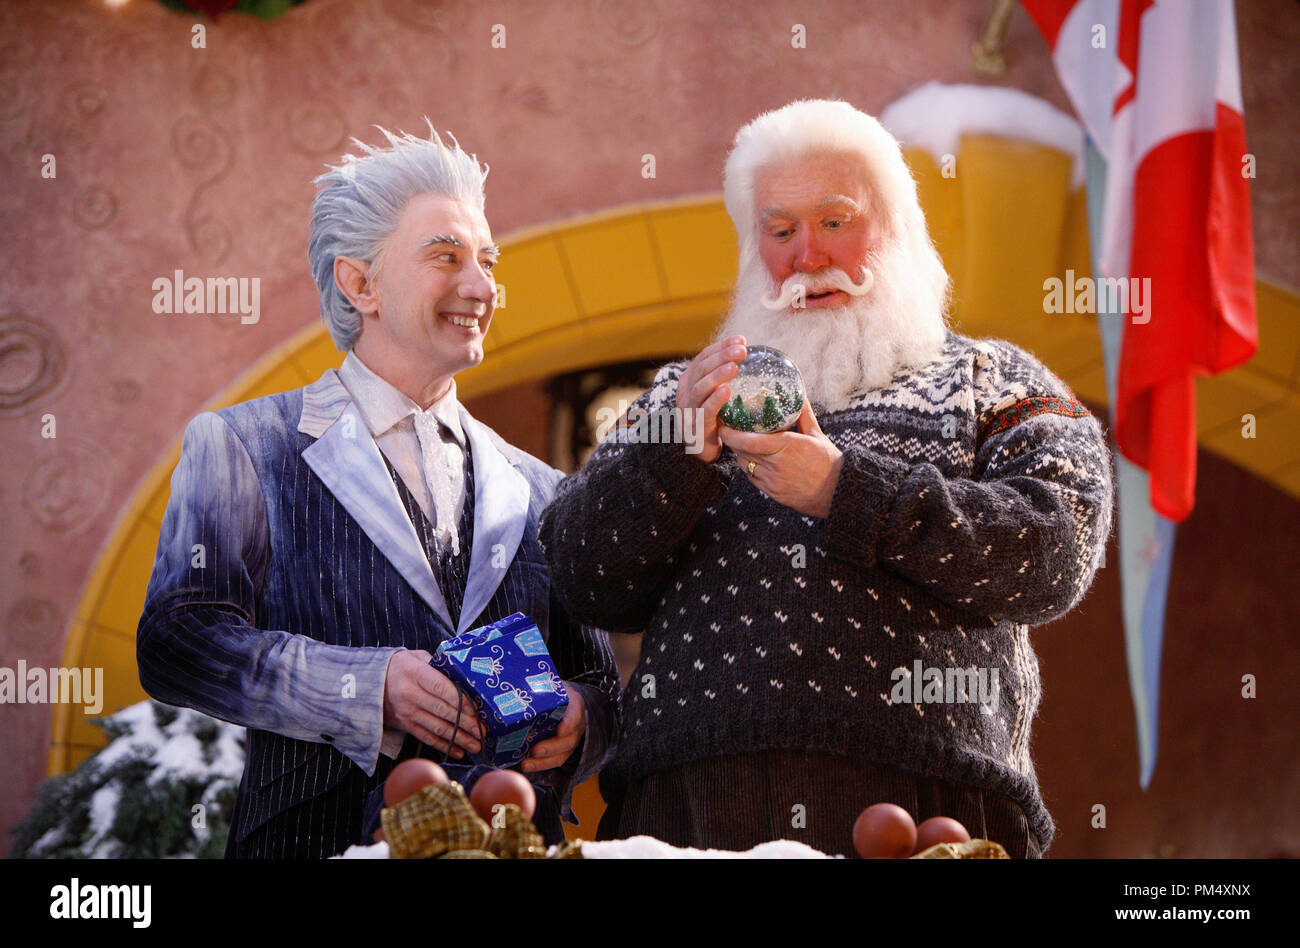 Studio Publicity Still from 'The Santa Clause 3: The Escape Clause' Martin Short, Tim Allen © 2006 Disney Enterprises, Inc. Photo credit: Joseph Lederer   File Reference # 307372611THA  For Editorial Use Only -  All Rights Reserved Stock Photo